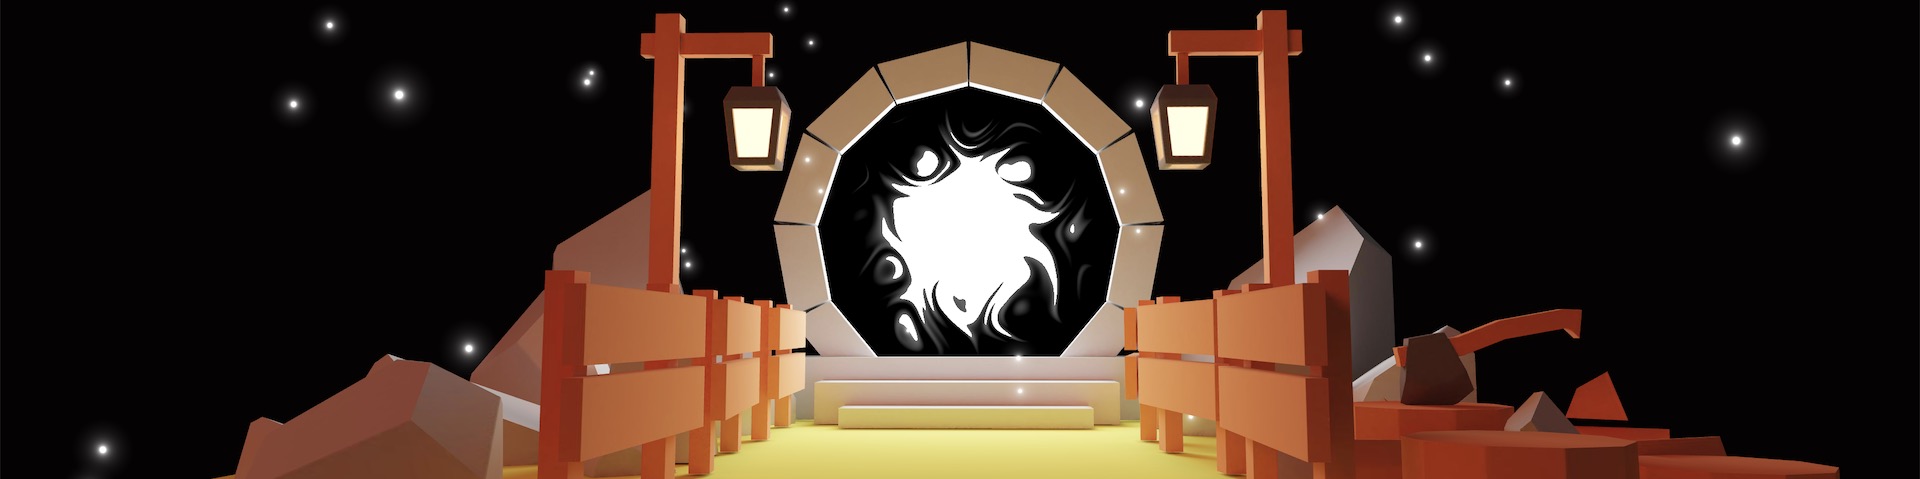 A wide digital banner depicting a stylized portal with swirling black and white patterns in the center, flanked by wooden structures with lanterns, against a starry night sky backdrop, suggesting a mystical or fantasy setting.